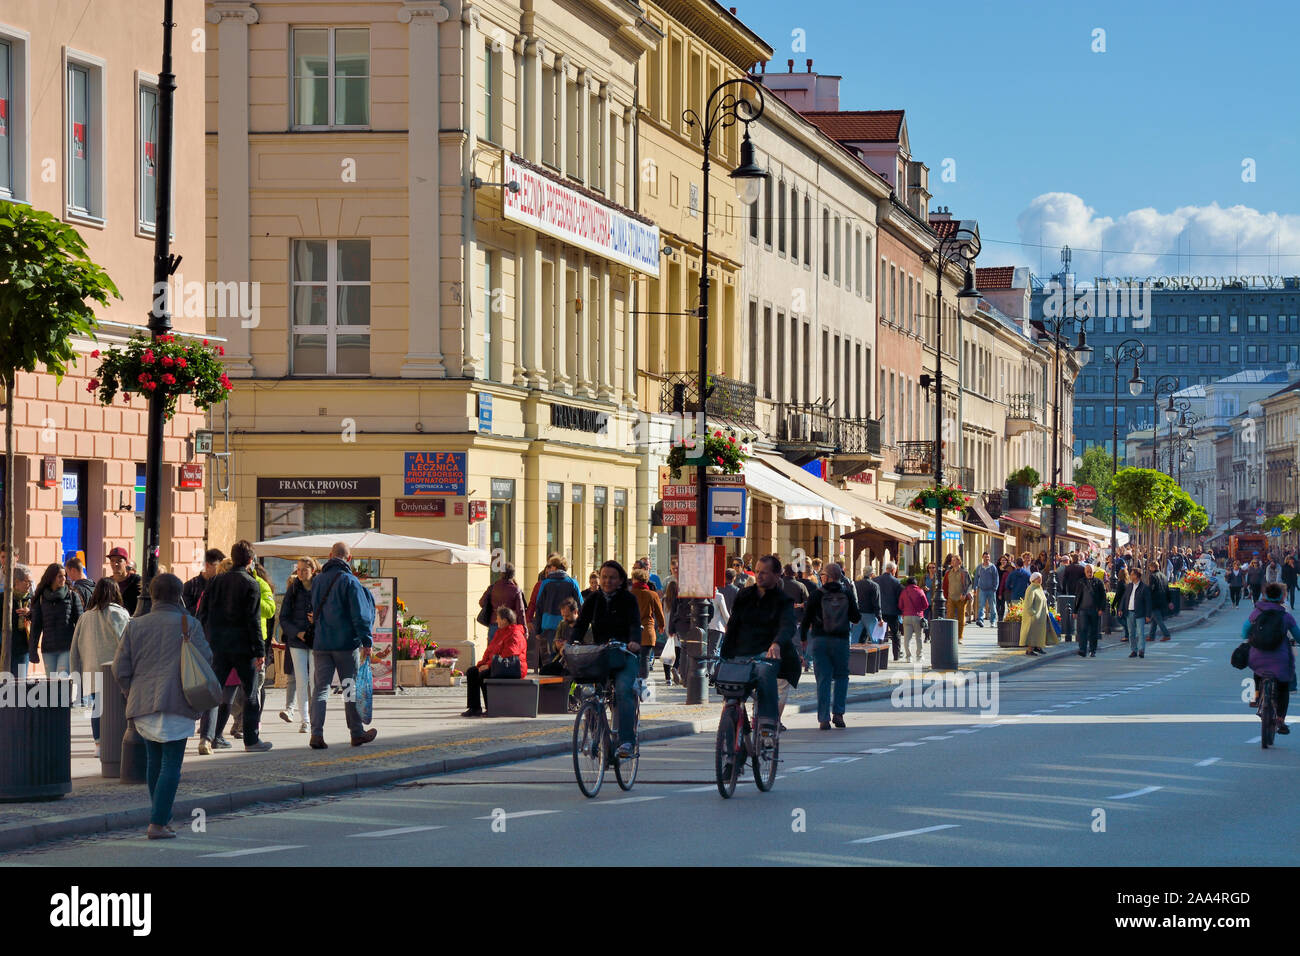 Nowi Swiat, one of the fashionable shopping streets in Warsaw. Poland Stock Photo